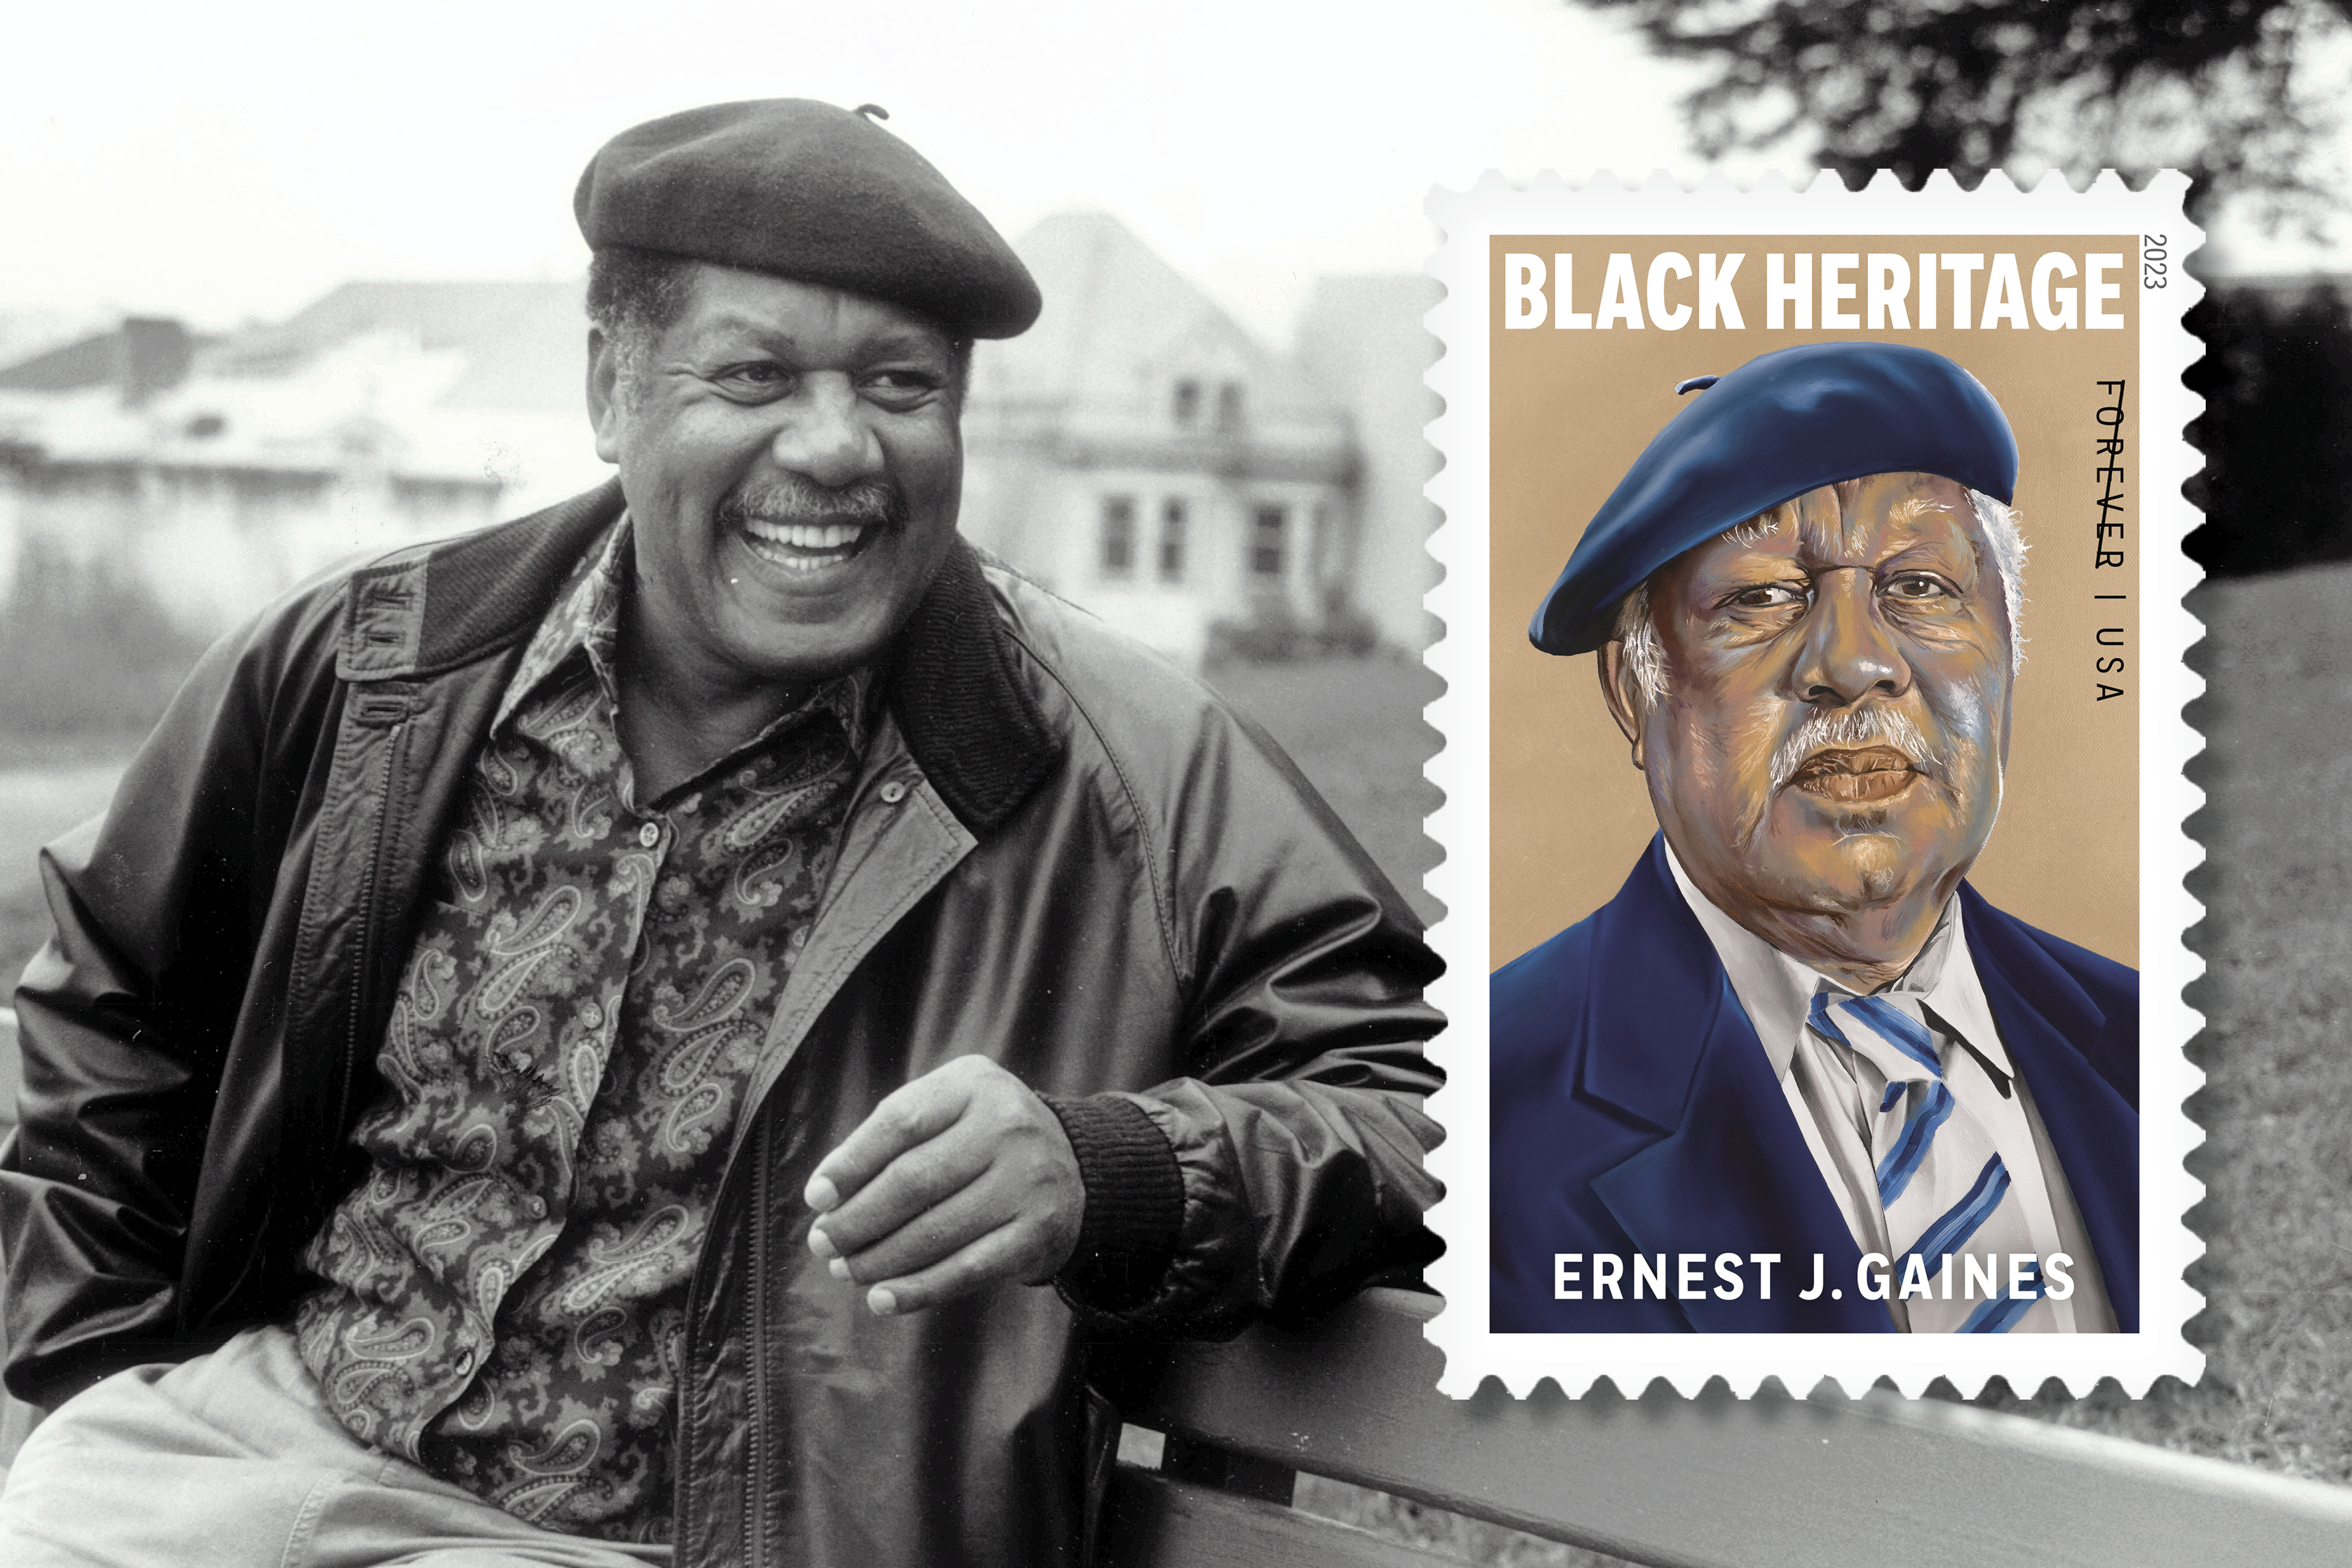 Photo of Ernest J. Gaines beside new stamp design